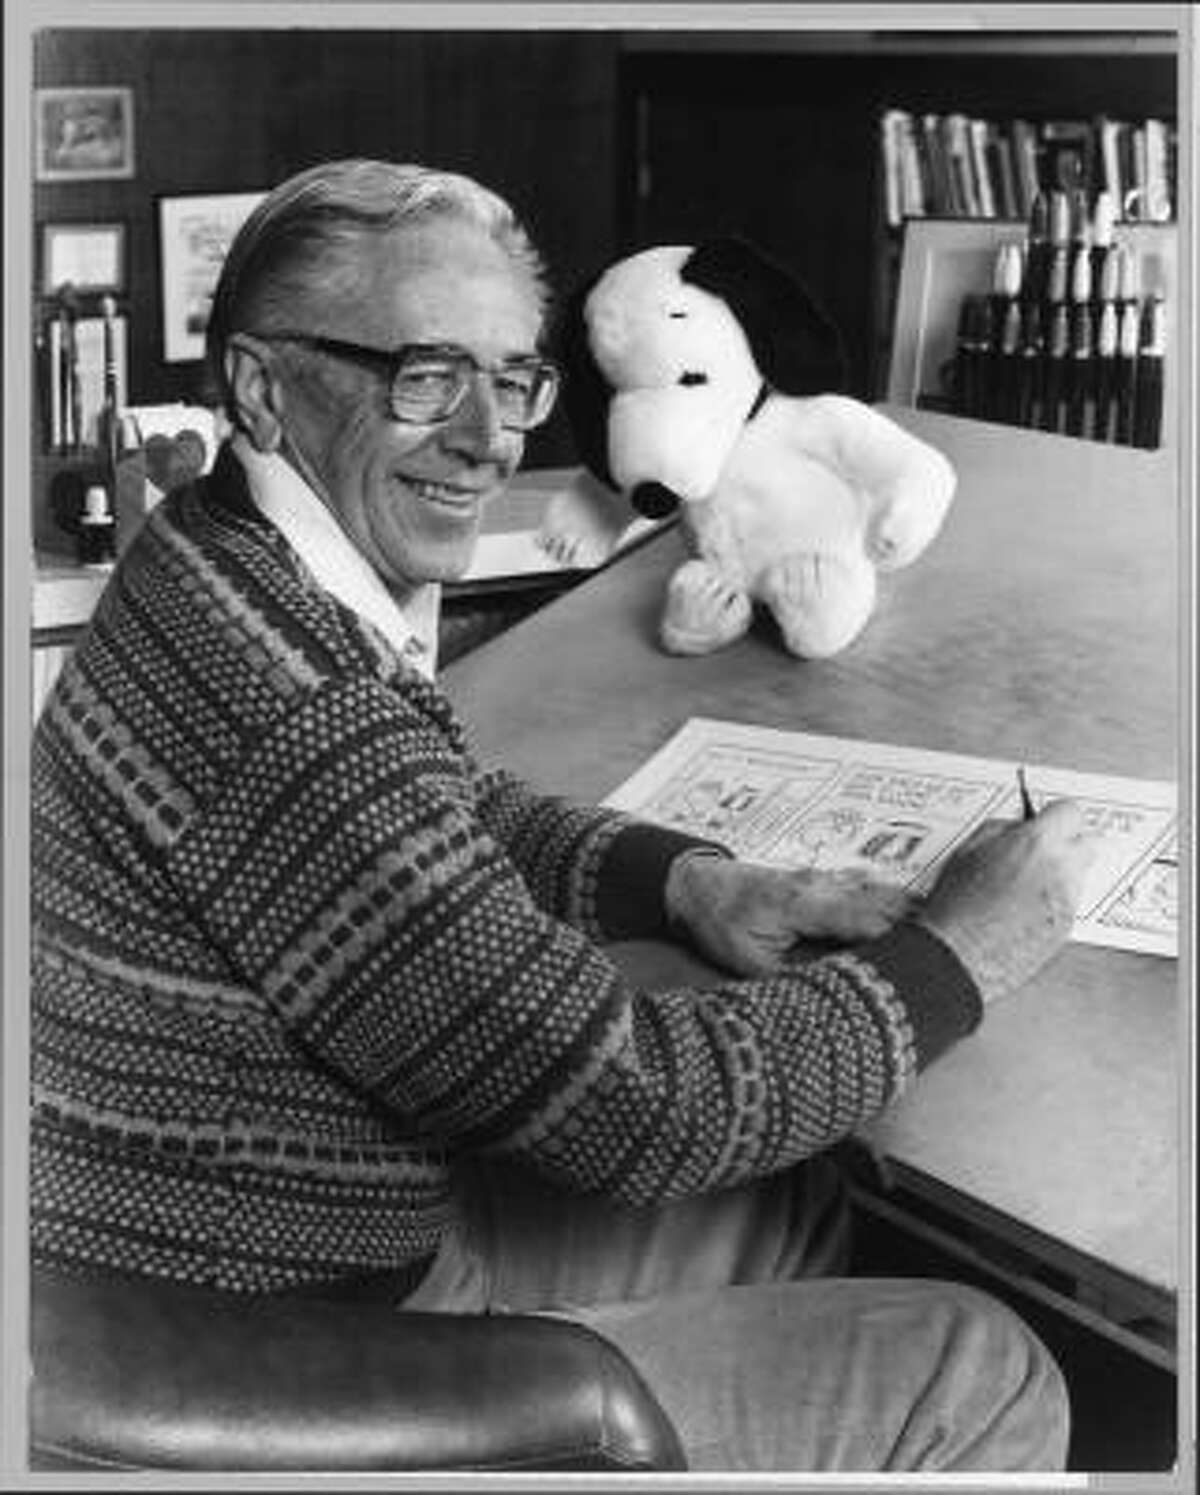 Charles Schulz at work in 1987 with a "Peanuts" strip and a plush Snoopy.